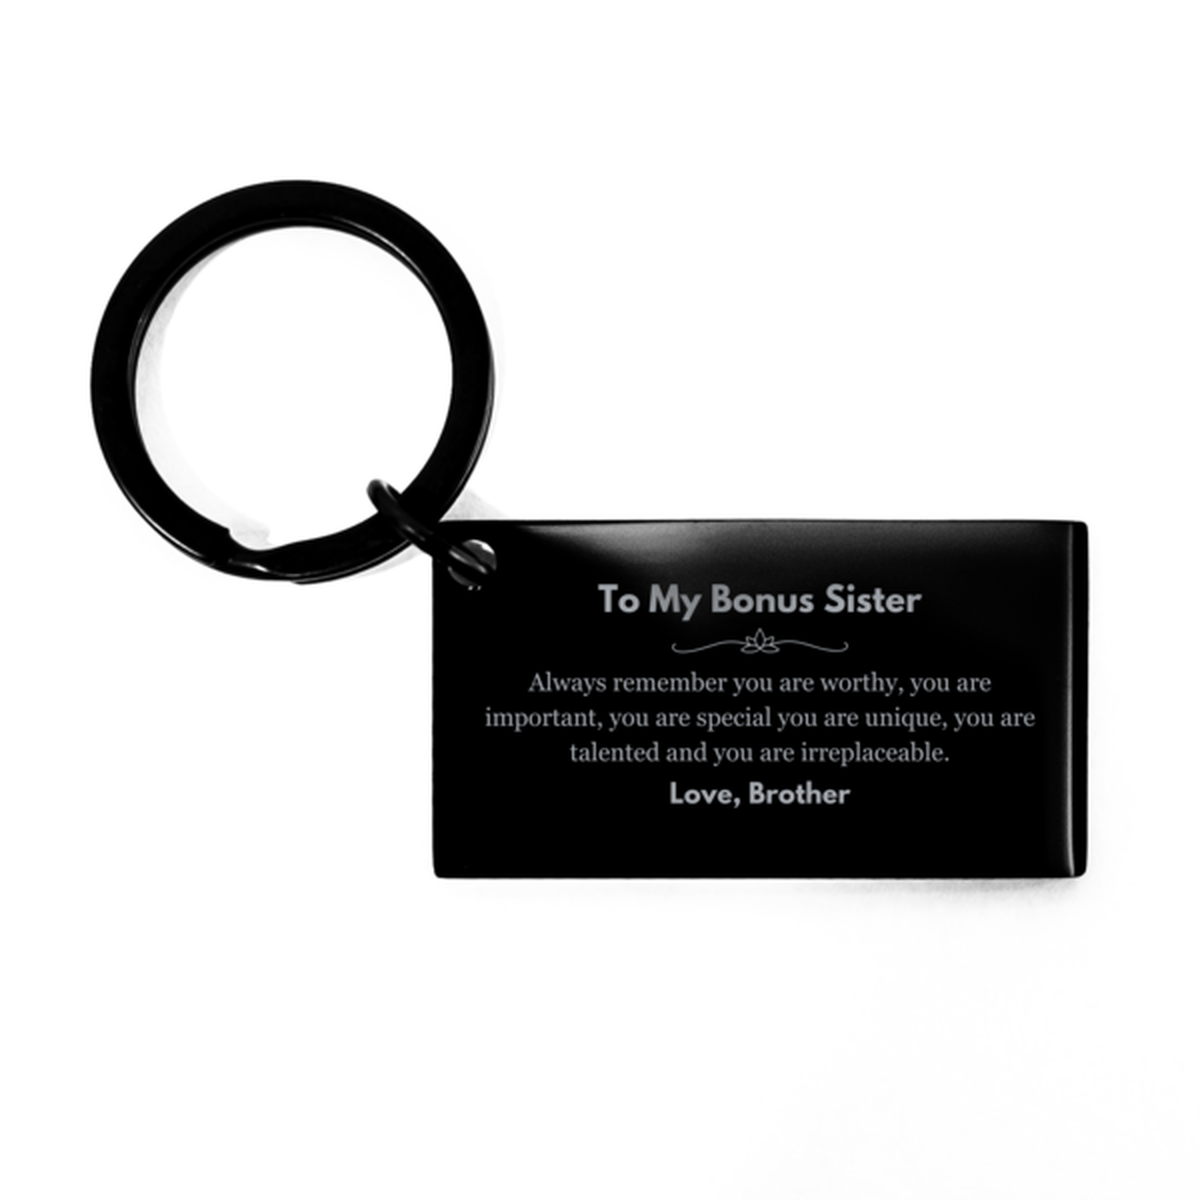 Bonus Sister Birthday Gifts from Brother, Inspirational Keychain for Bonus Sister Christmas Graduation Gifts for Bonus Sister Always remember you are worthy, you are important. Love, Brother